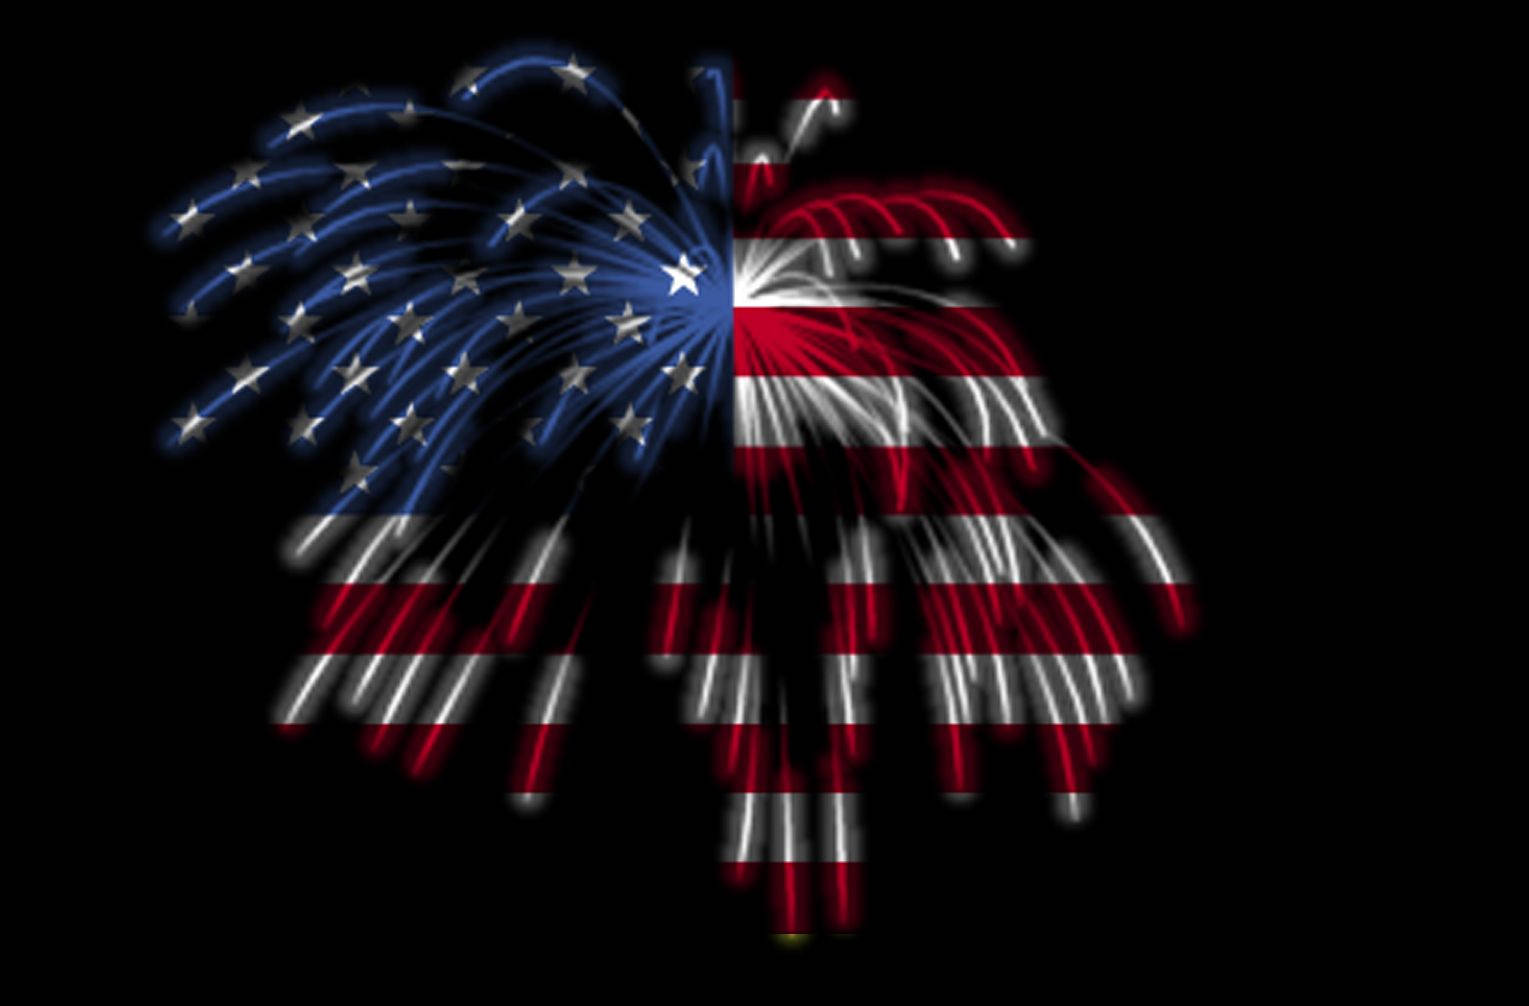 Celebrate the Red, White and Blue this 4th of July! Wallpaper